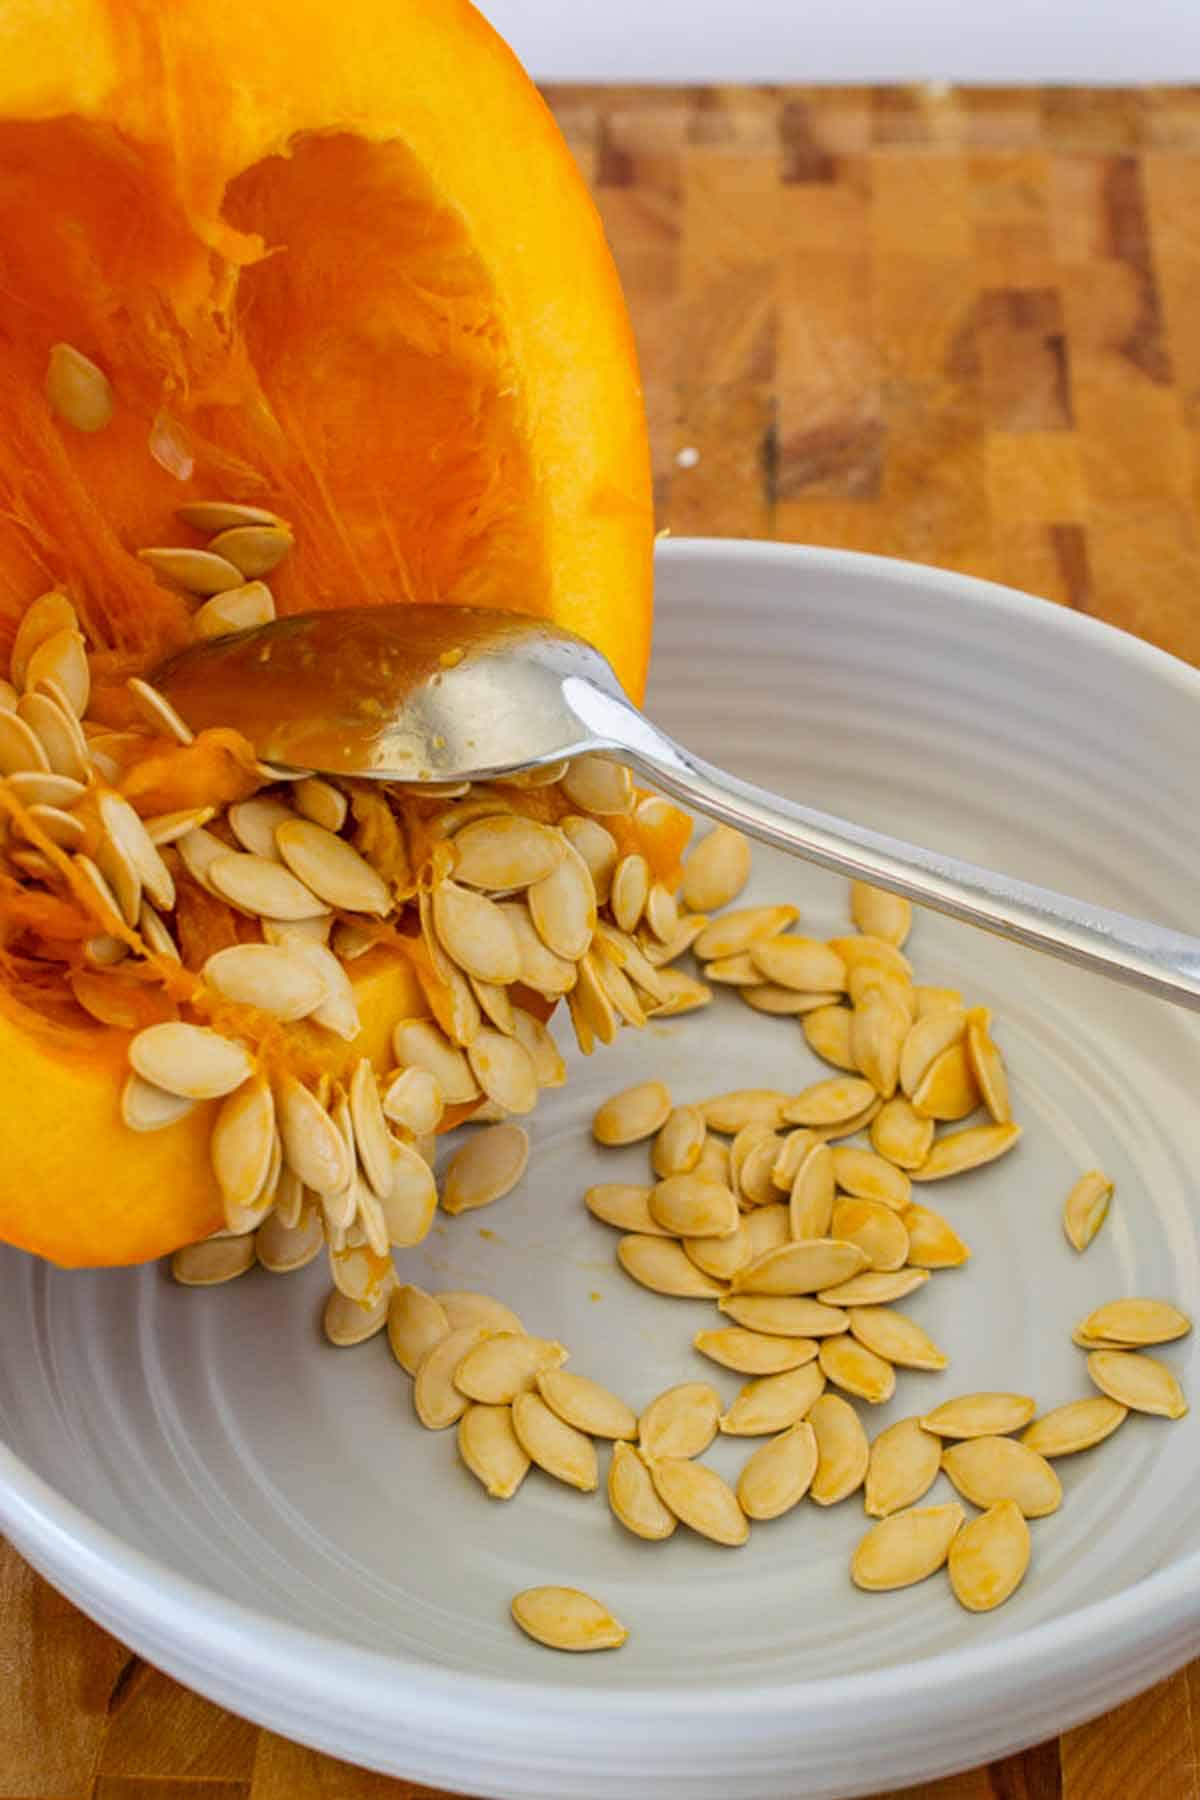 Spoon scraping out the pumpkin seeds and string into a bowl.